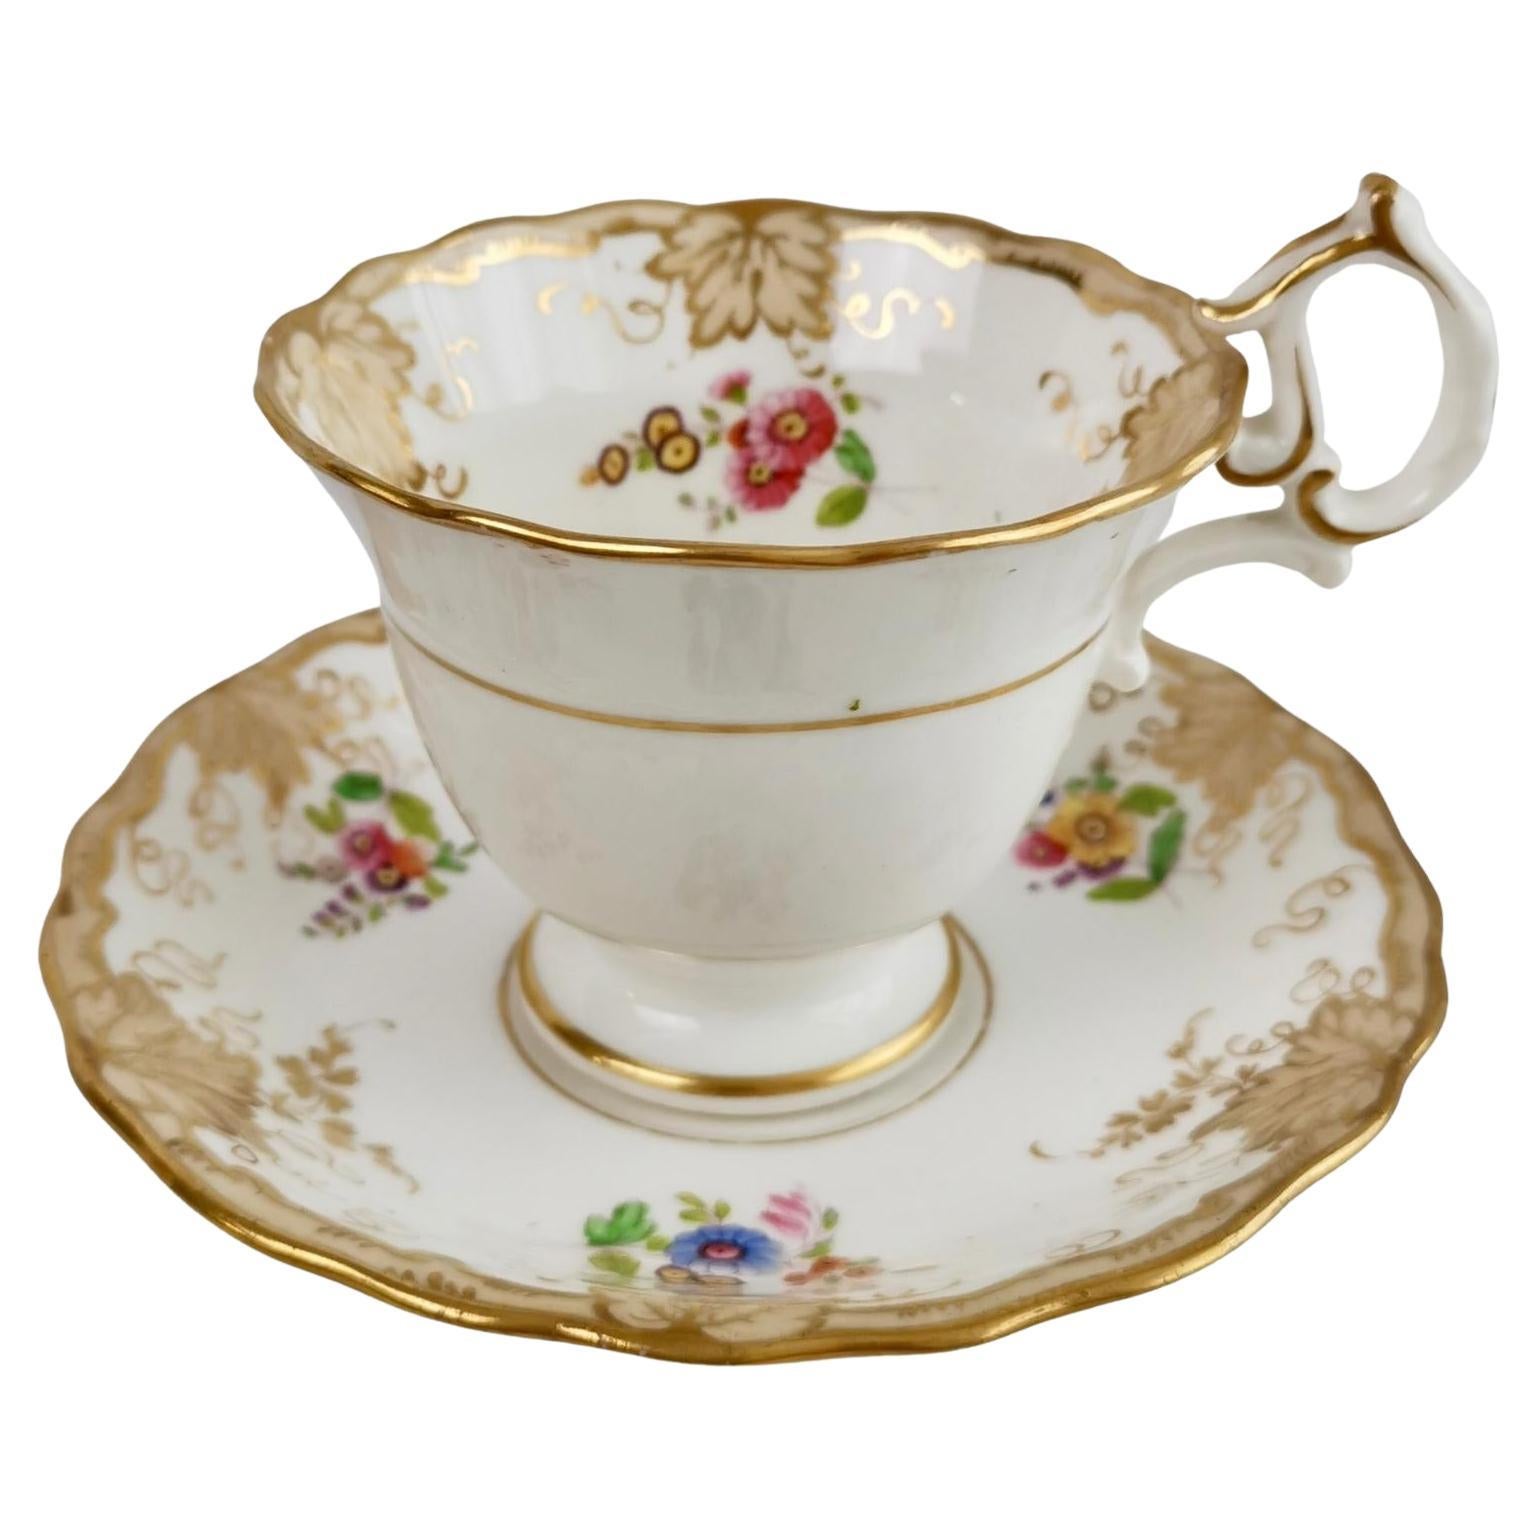 H&R Daniel Coffee Cup, White, Grey with Printed Flowers, Rococo Revival, ca 1838 For Sale